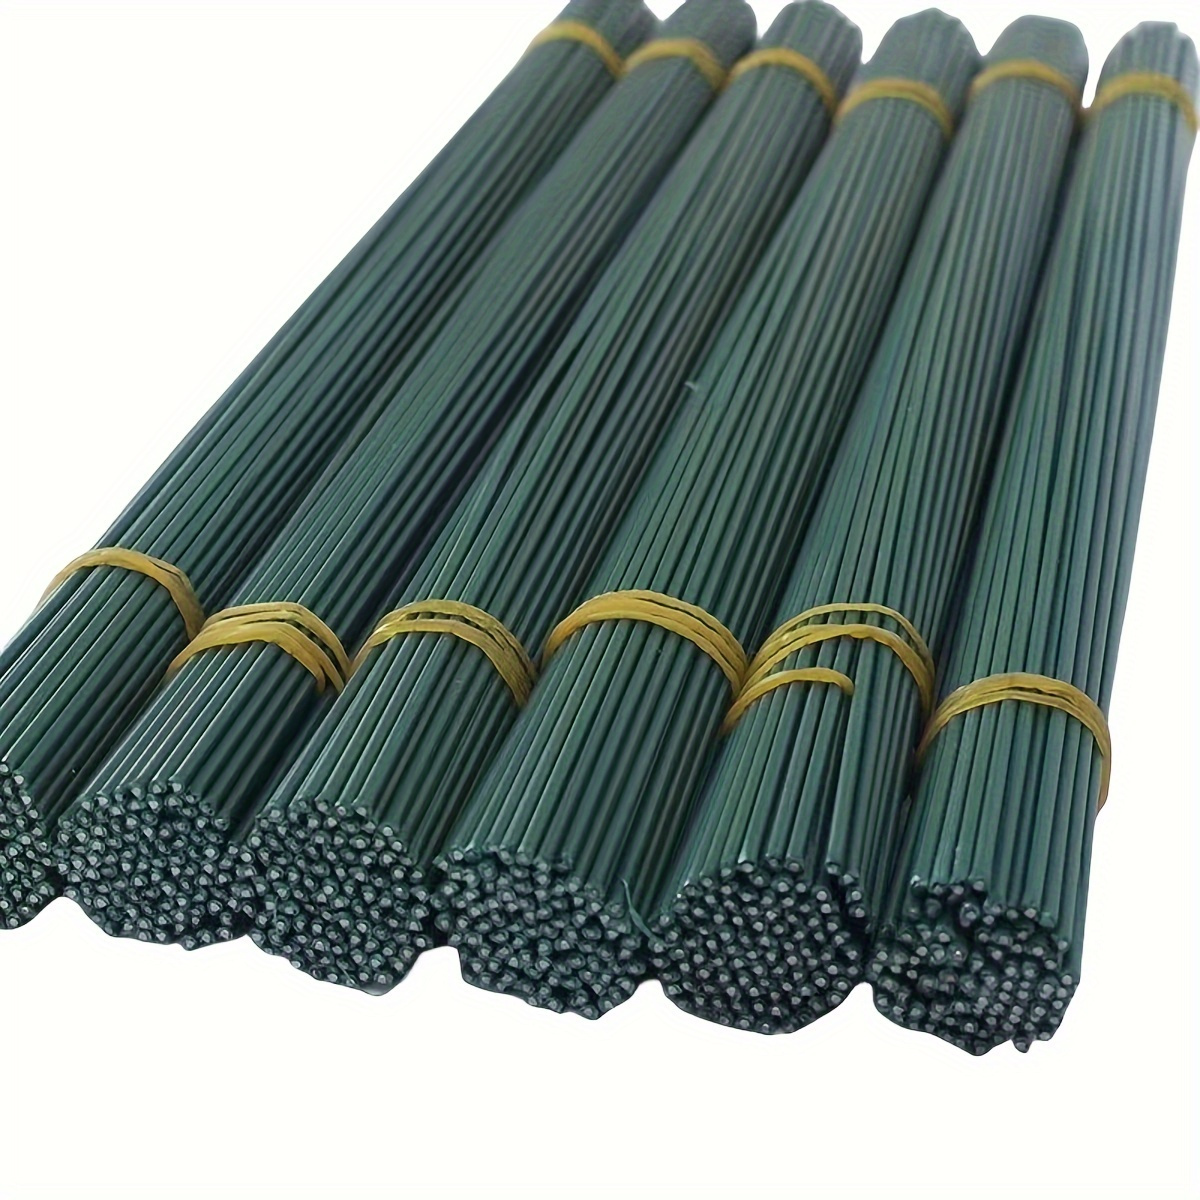 

20-piece Green Floral Stems 11.81" & 15.75" - Diy Craft Wire For Handmade Bouquets And Arrangements